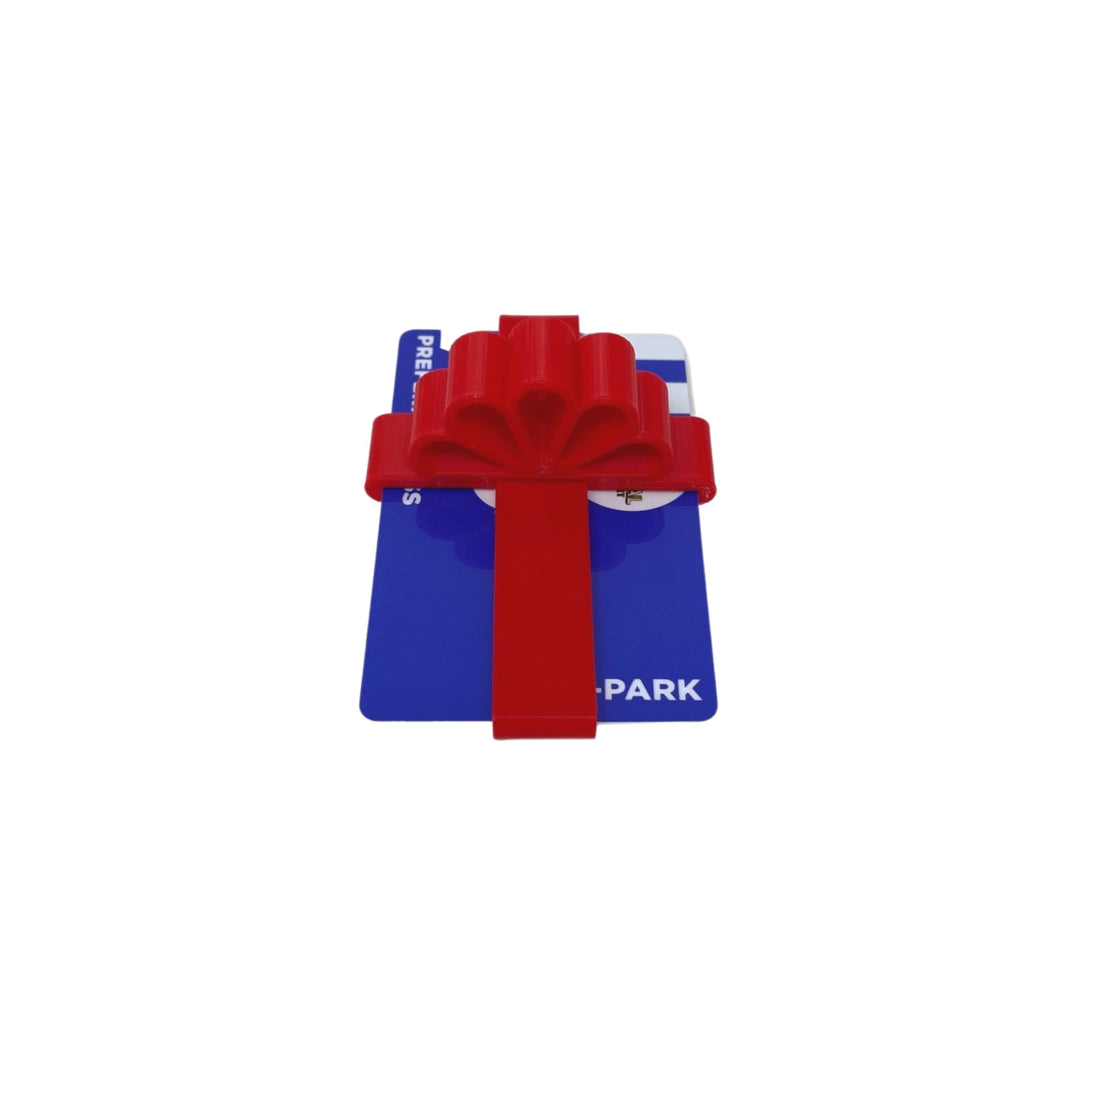 Gift Card Red Bow Wrapper - Add Some Flare To Your Gifts This Holiday Season - Holds Standard Gift Cards